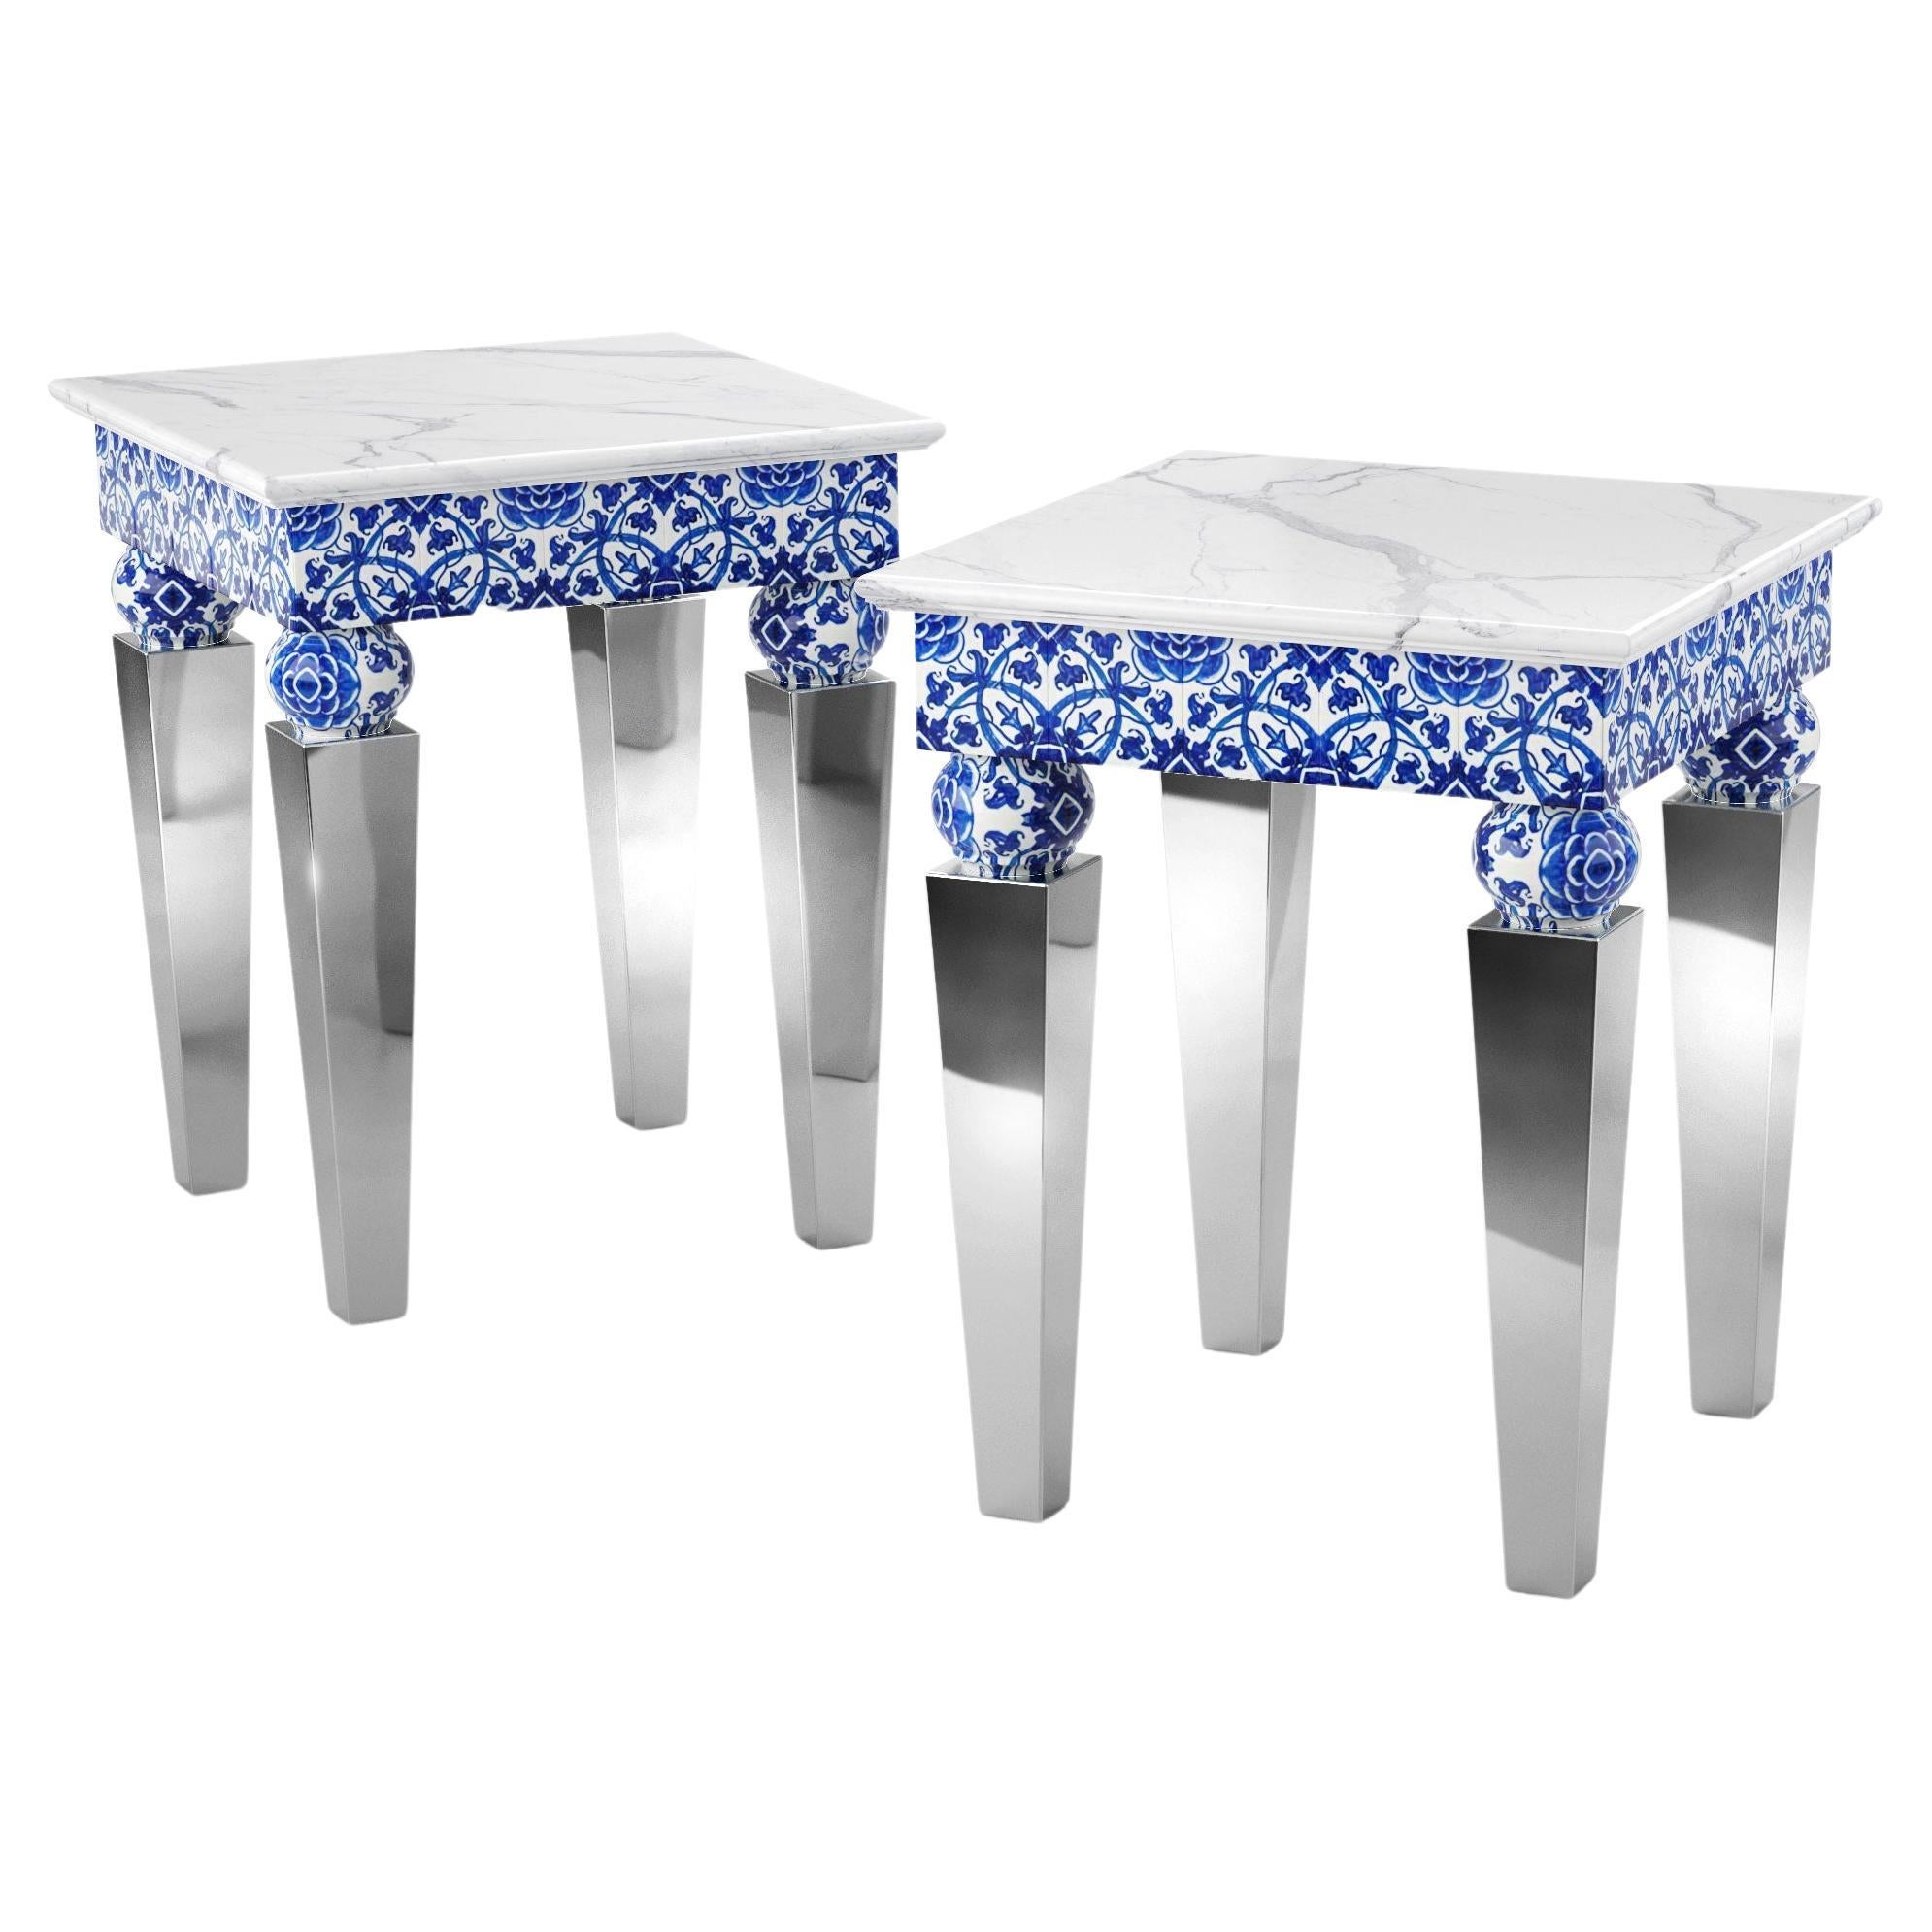 Two Side Tables, White Marble, Mirror Steel, Blue Majolica Tiles, Also Outdoor For Sale